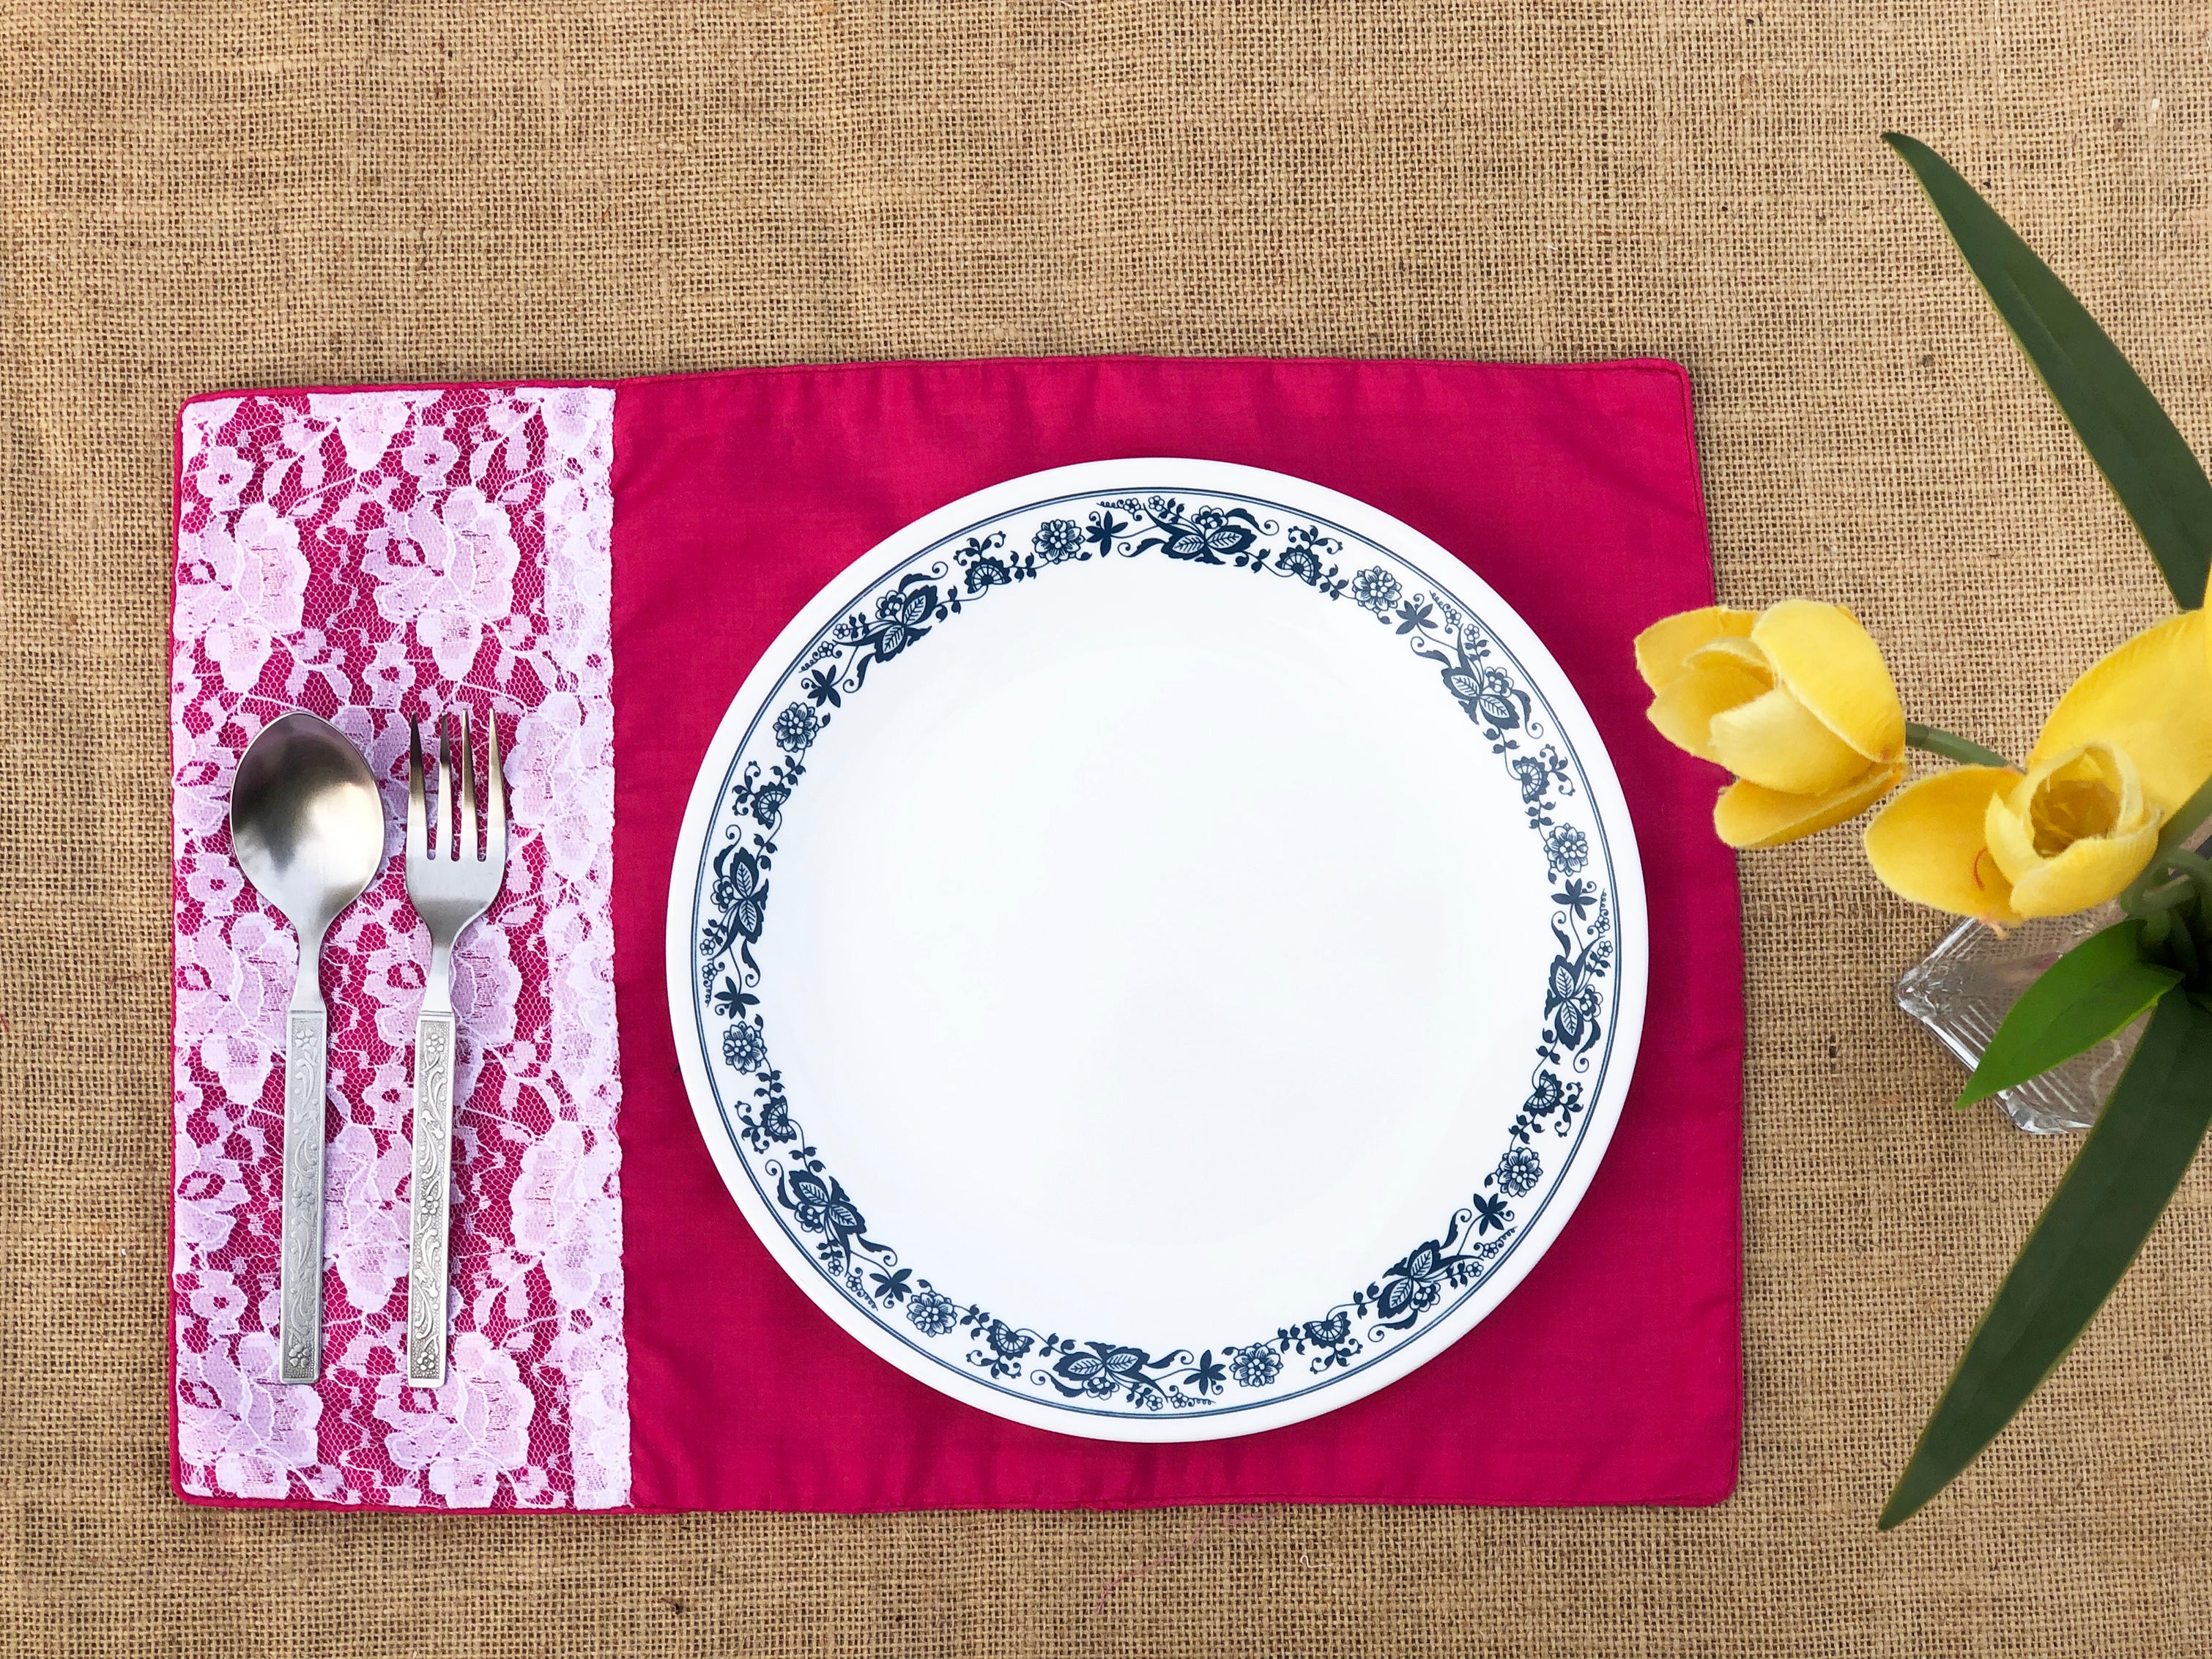 Pink Placemats